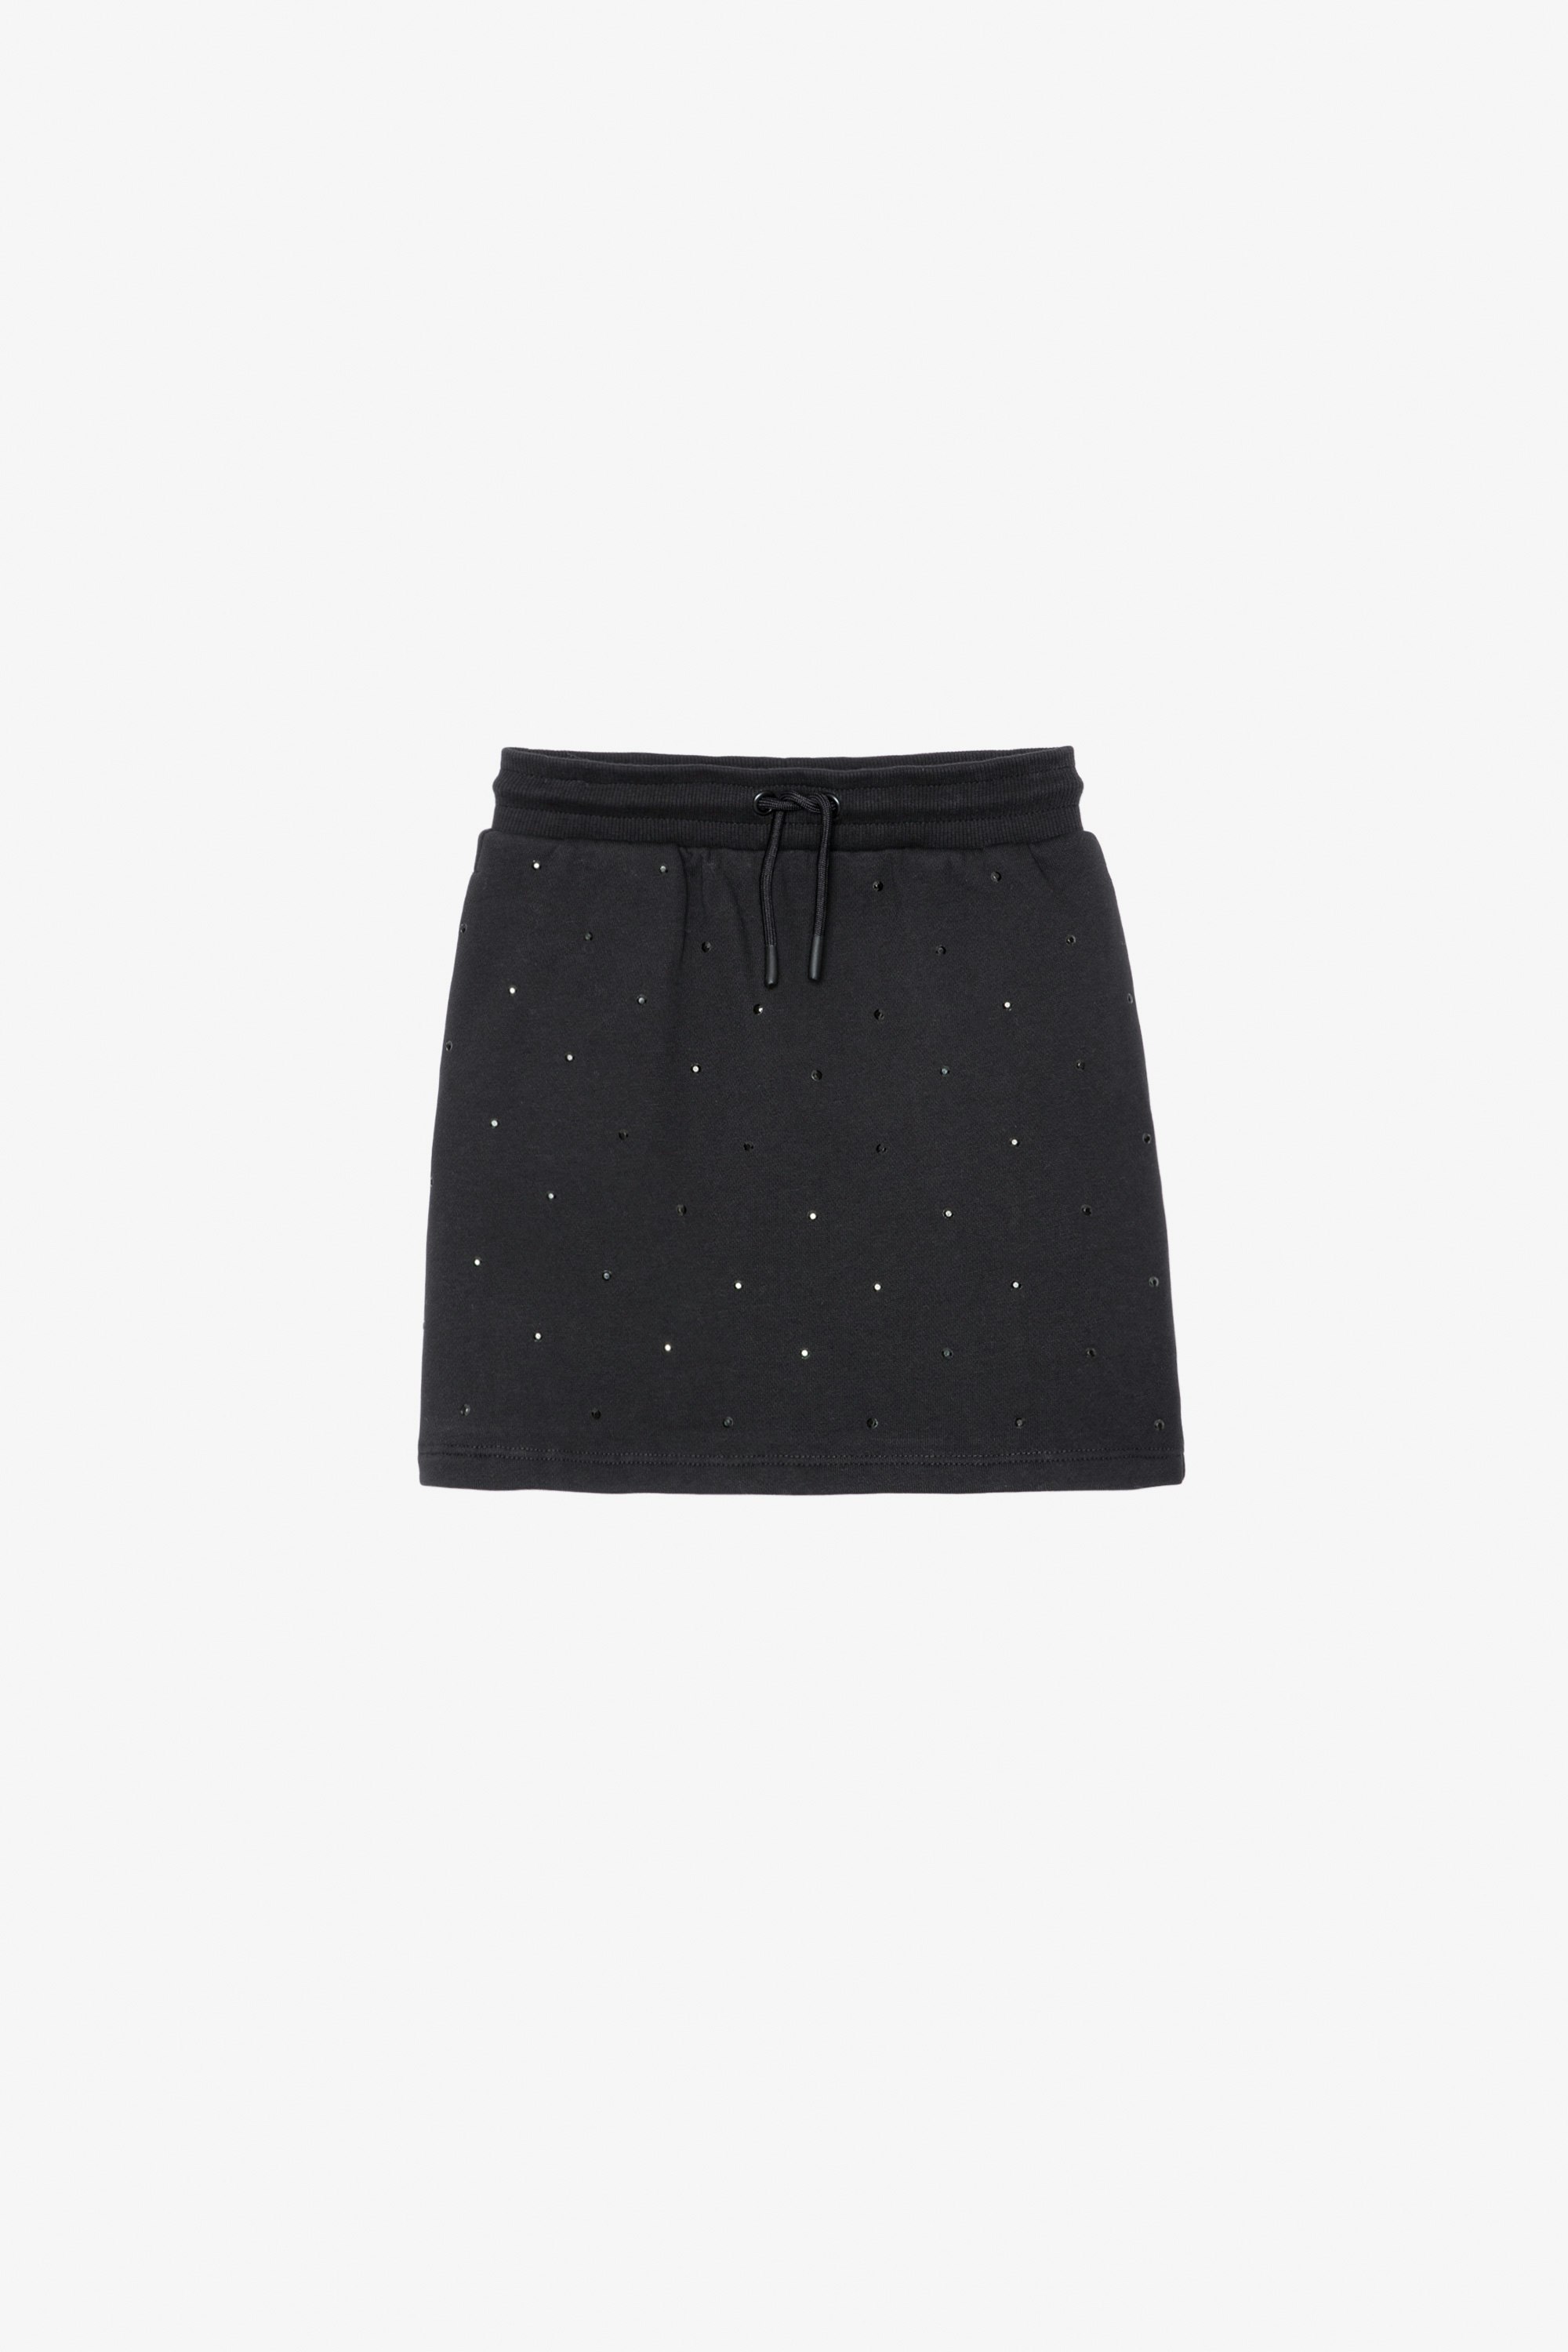 Alice Girls’ Skirt Girls’ black cotton fleece skirt with diamanté and wings motif on the back.